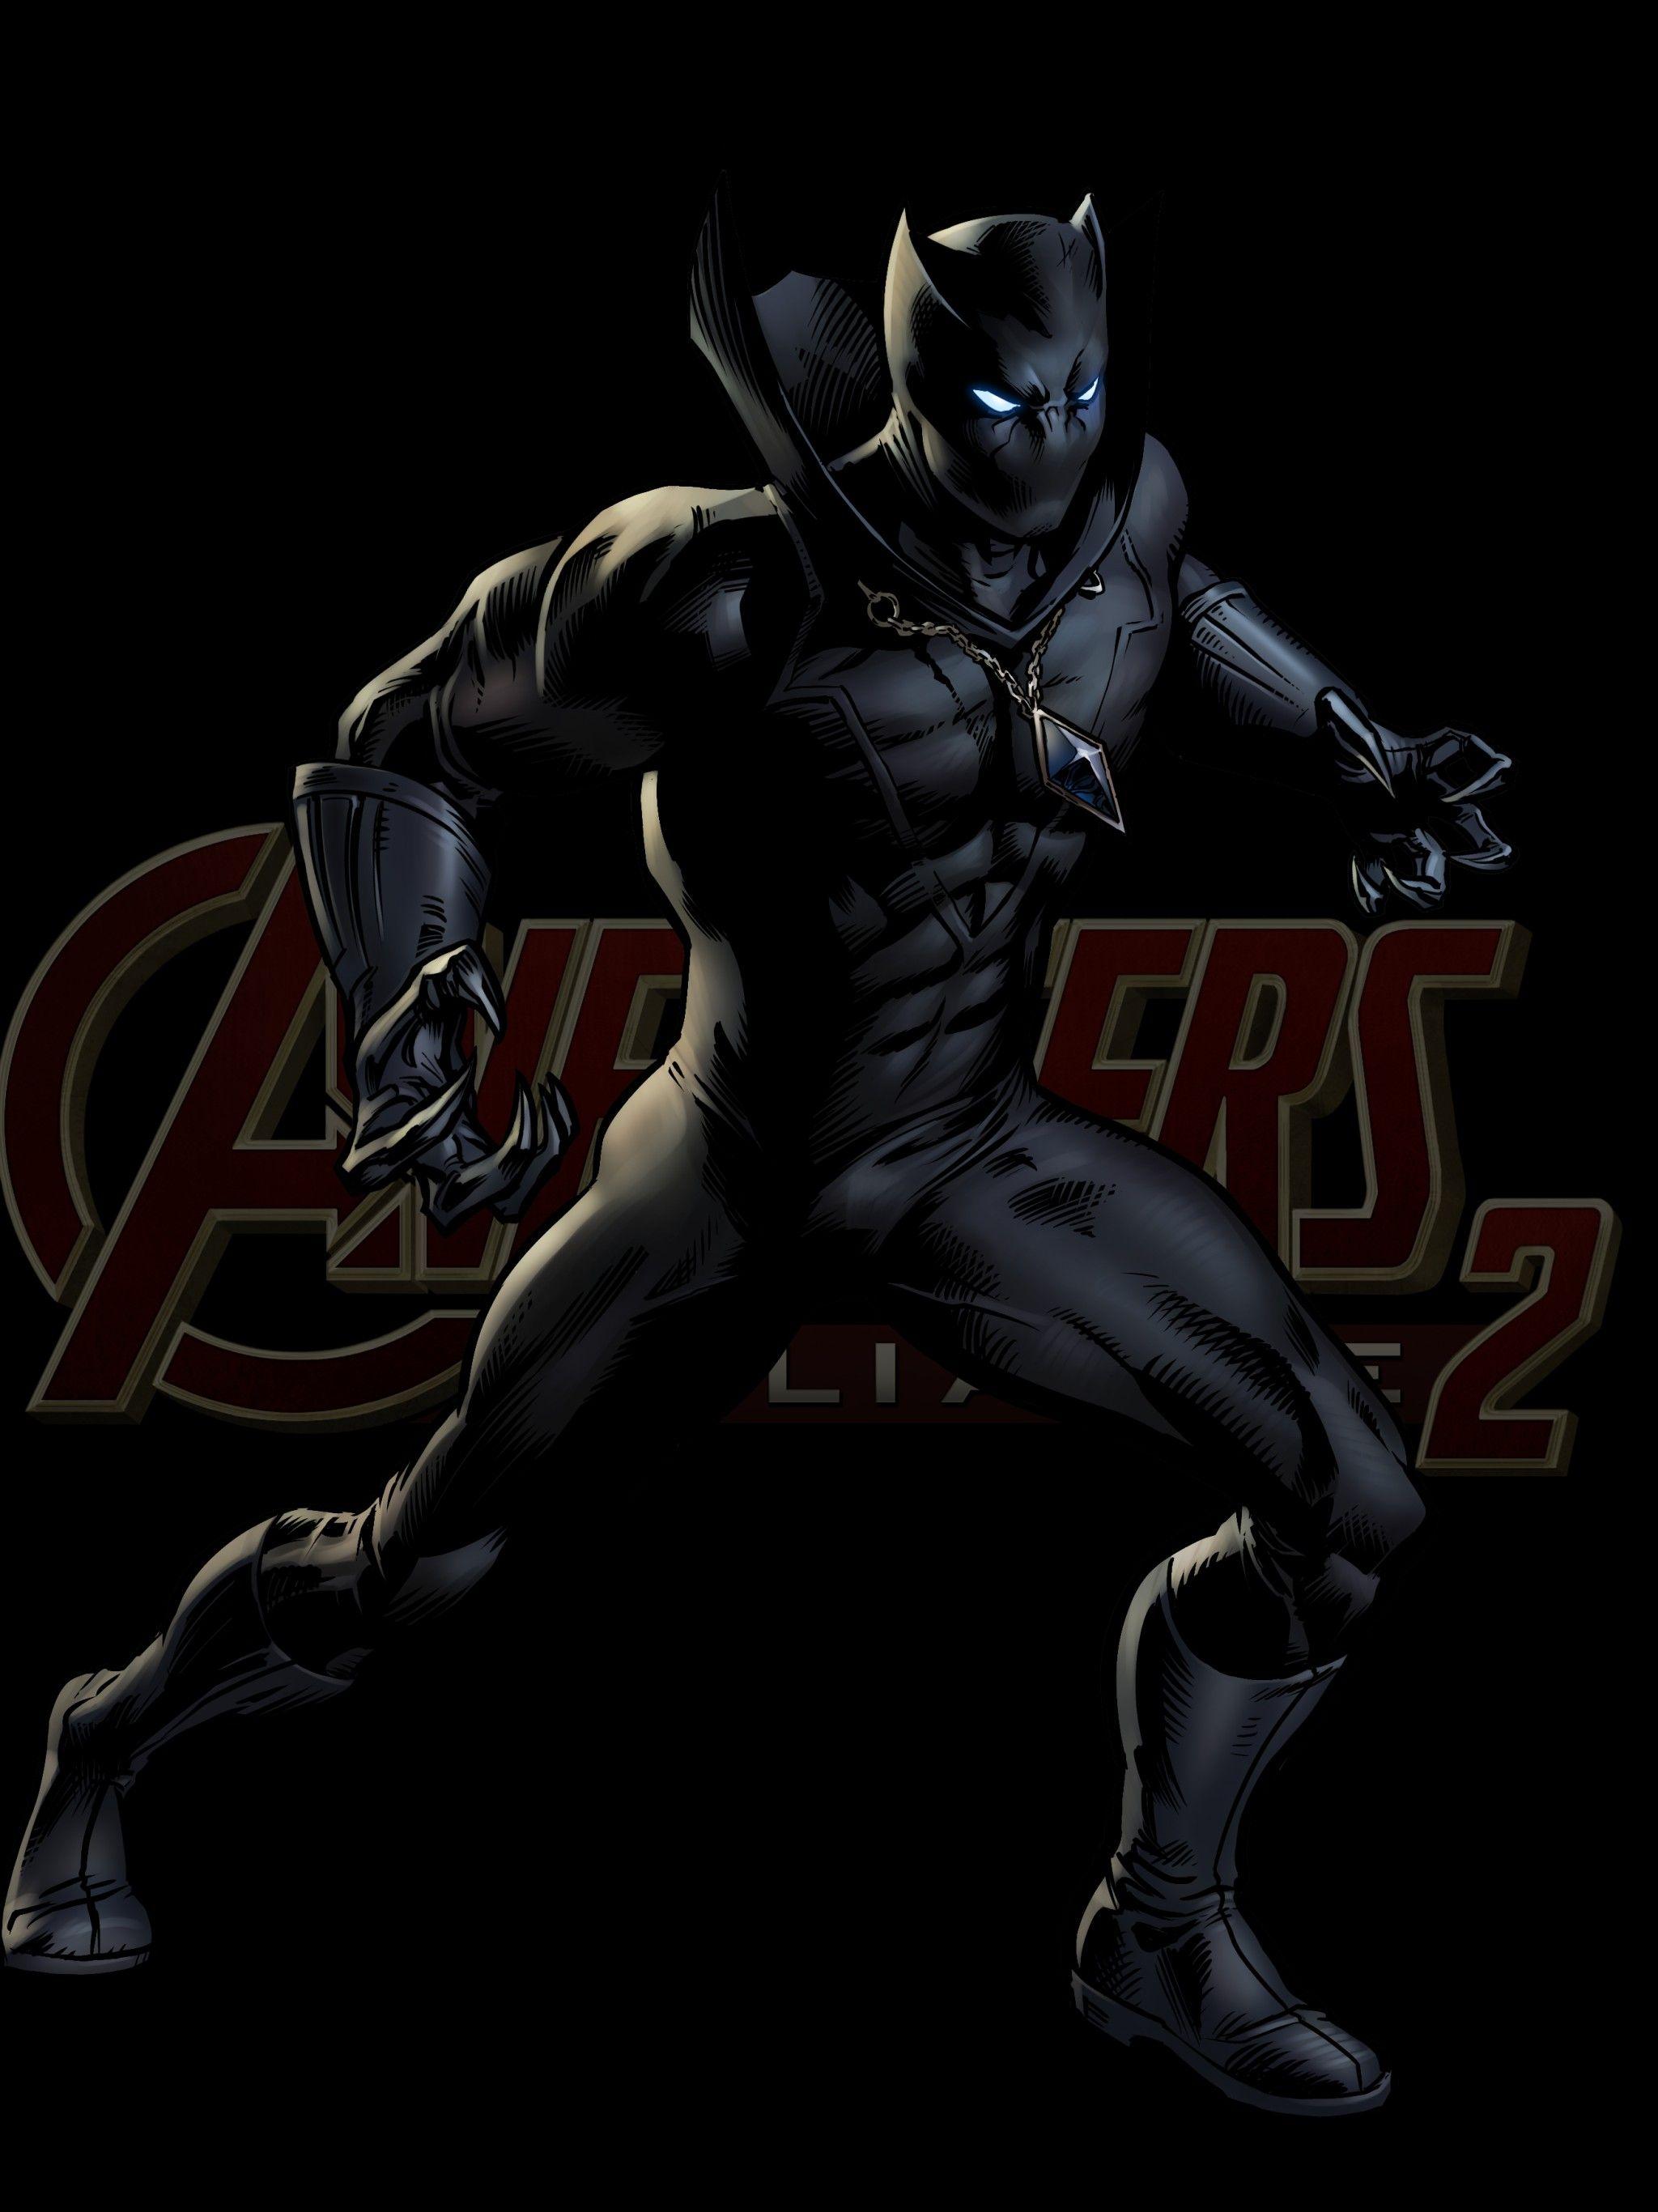 Black Panther 3D Wallpapers - Top Free Black Panther 3D Backgrounds